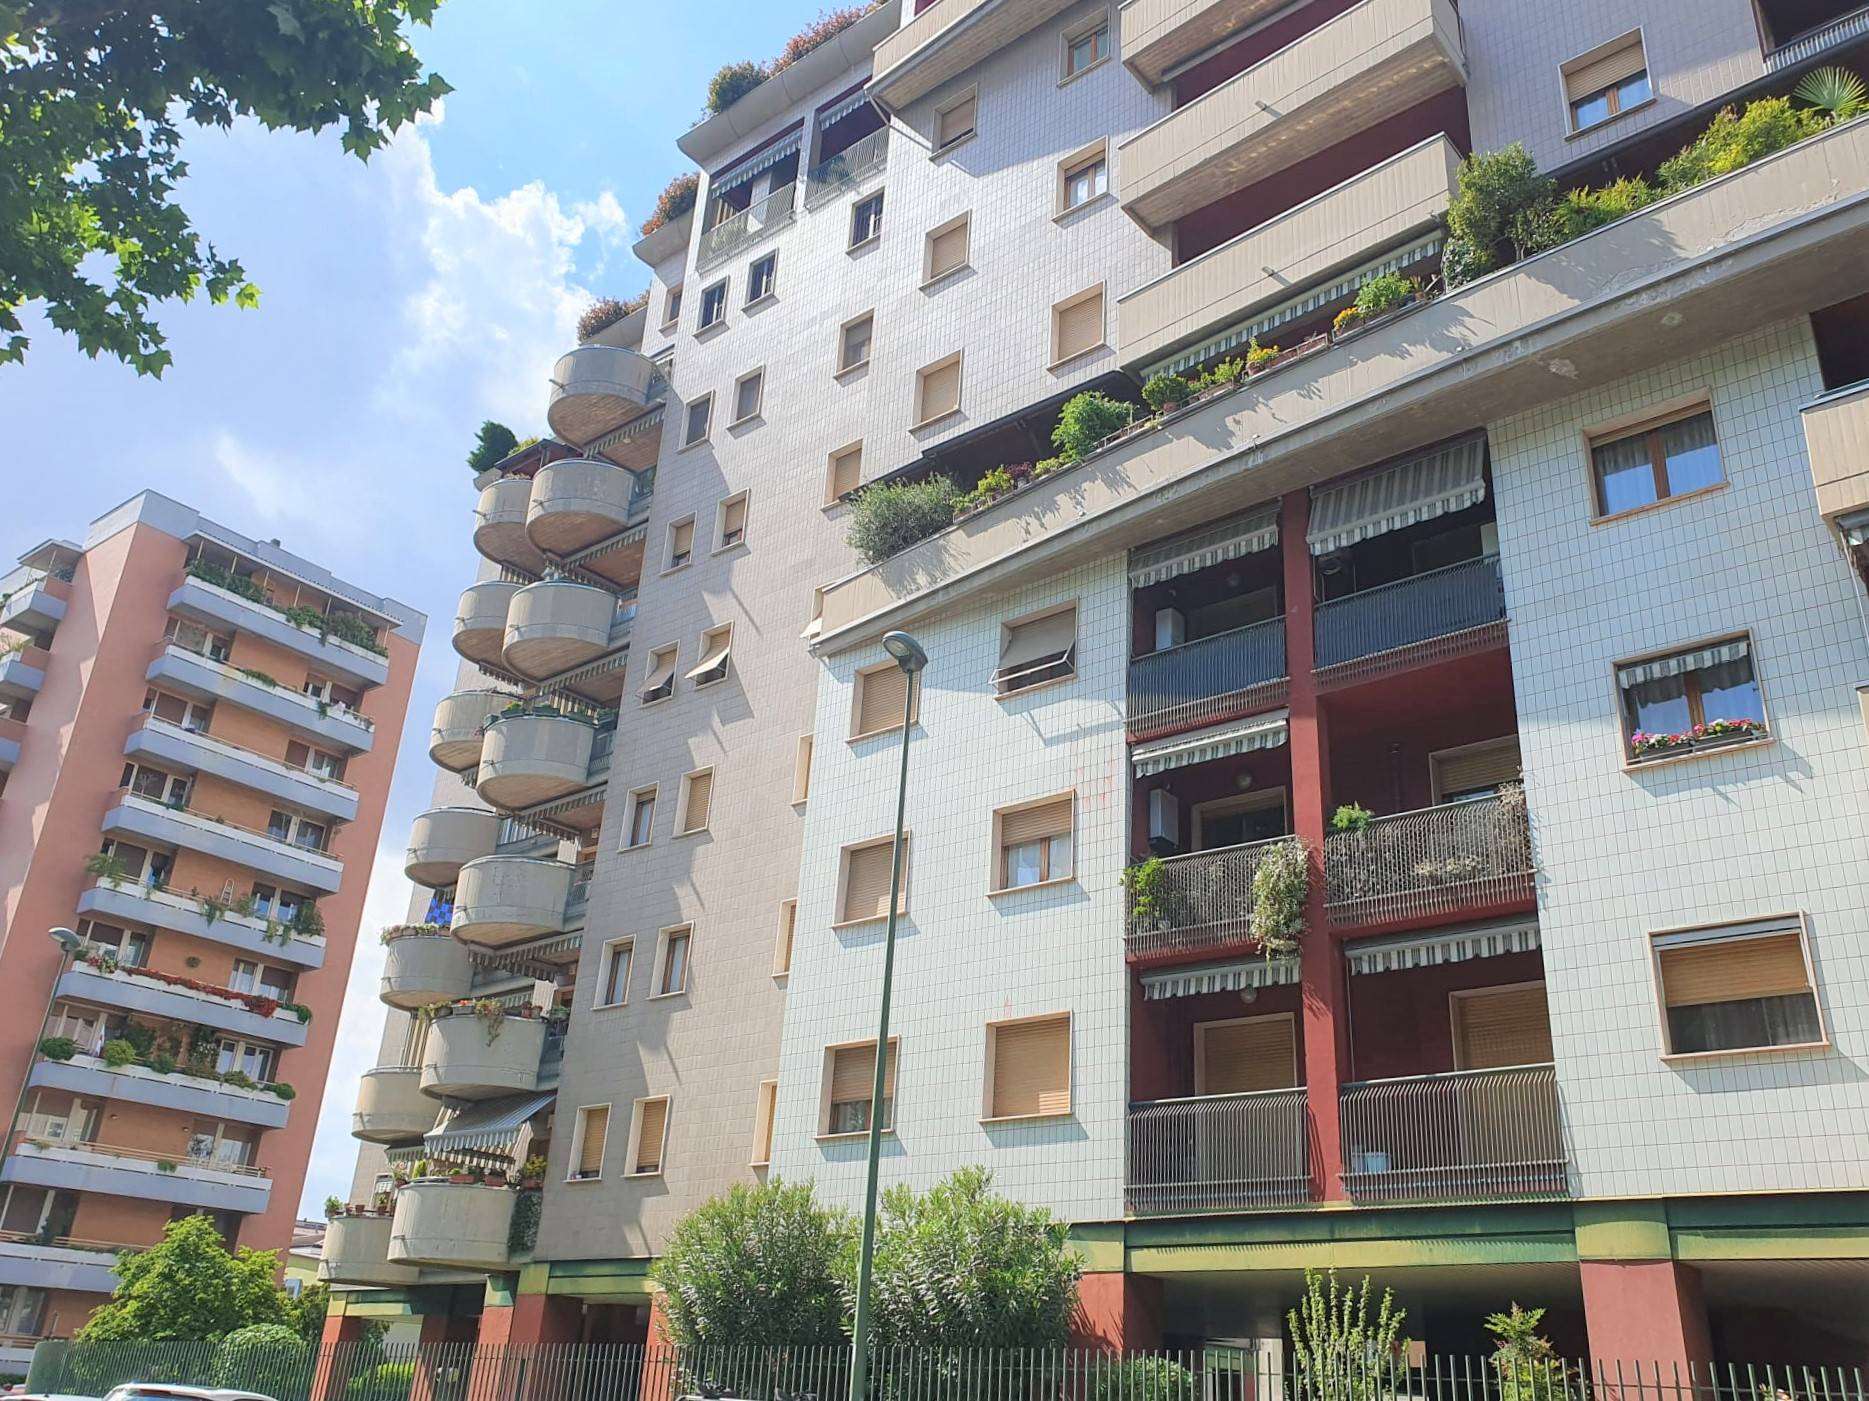 SESTO SAN GIOVANNI, Apartment for sale of 60 Sq. mt., Excellent Condition, Heating Individual heating system, Energetic class: G, Epi: 175 kwh/m2 